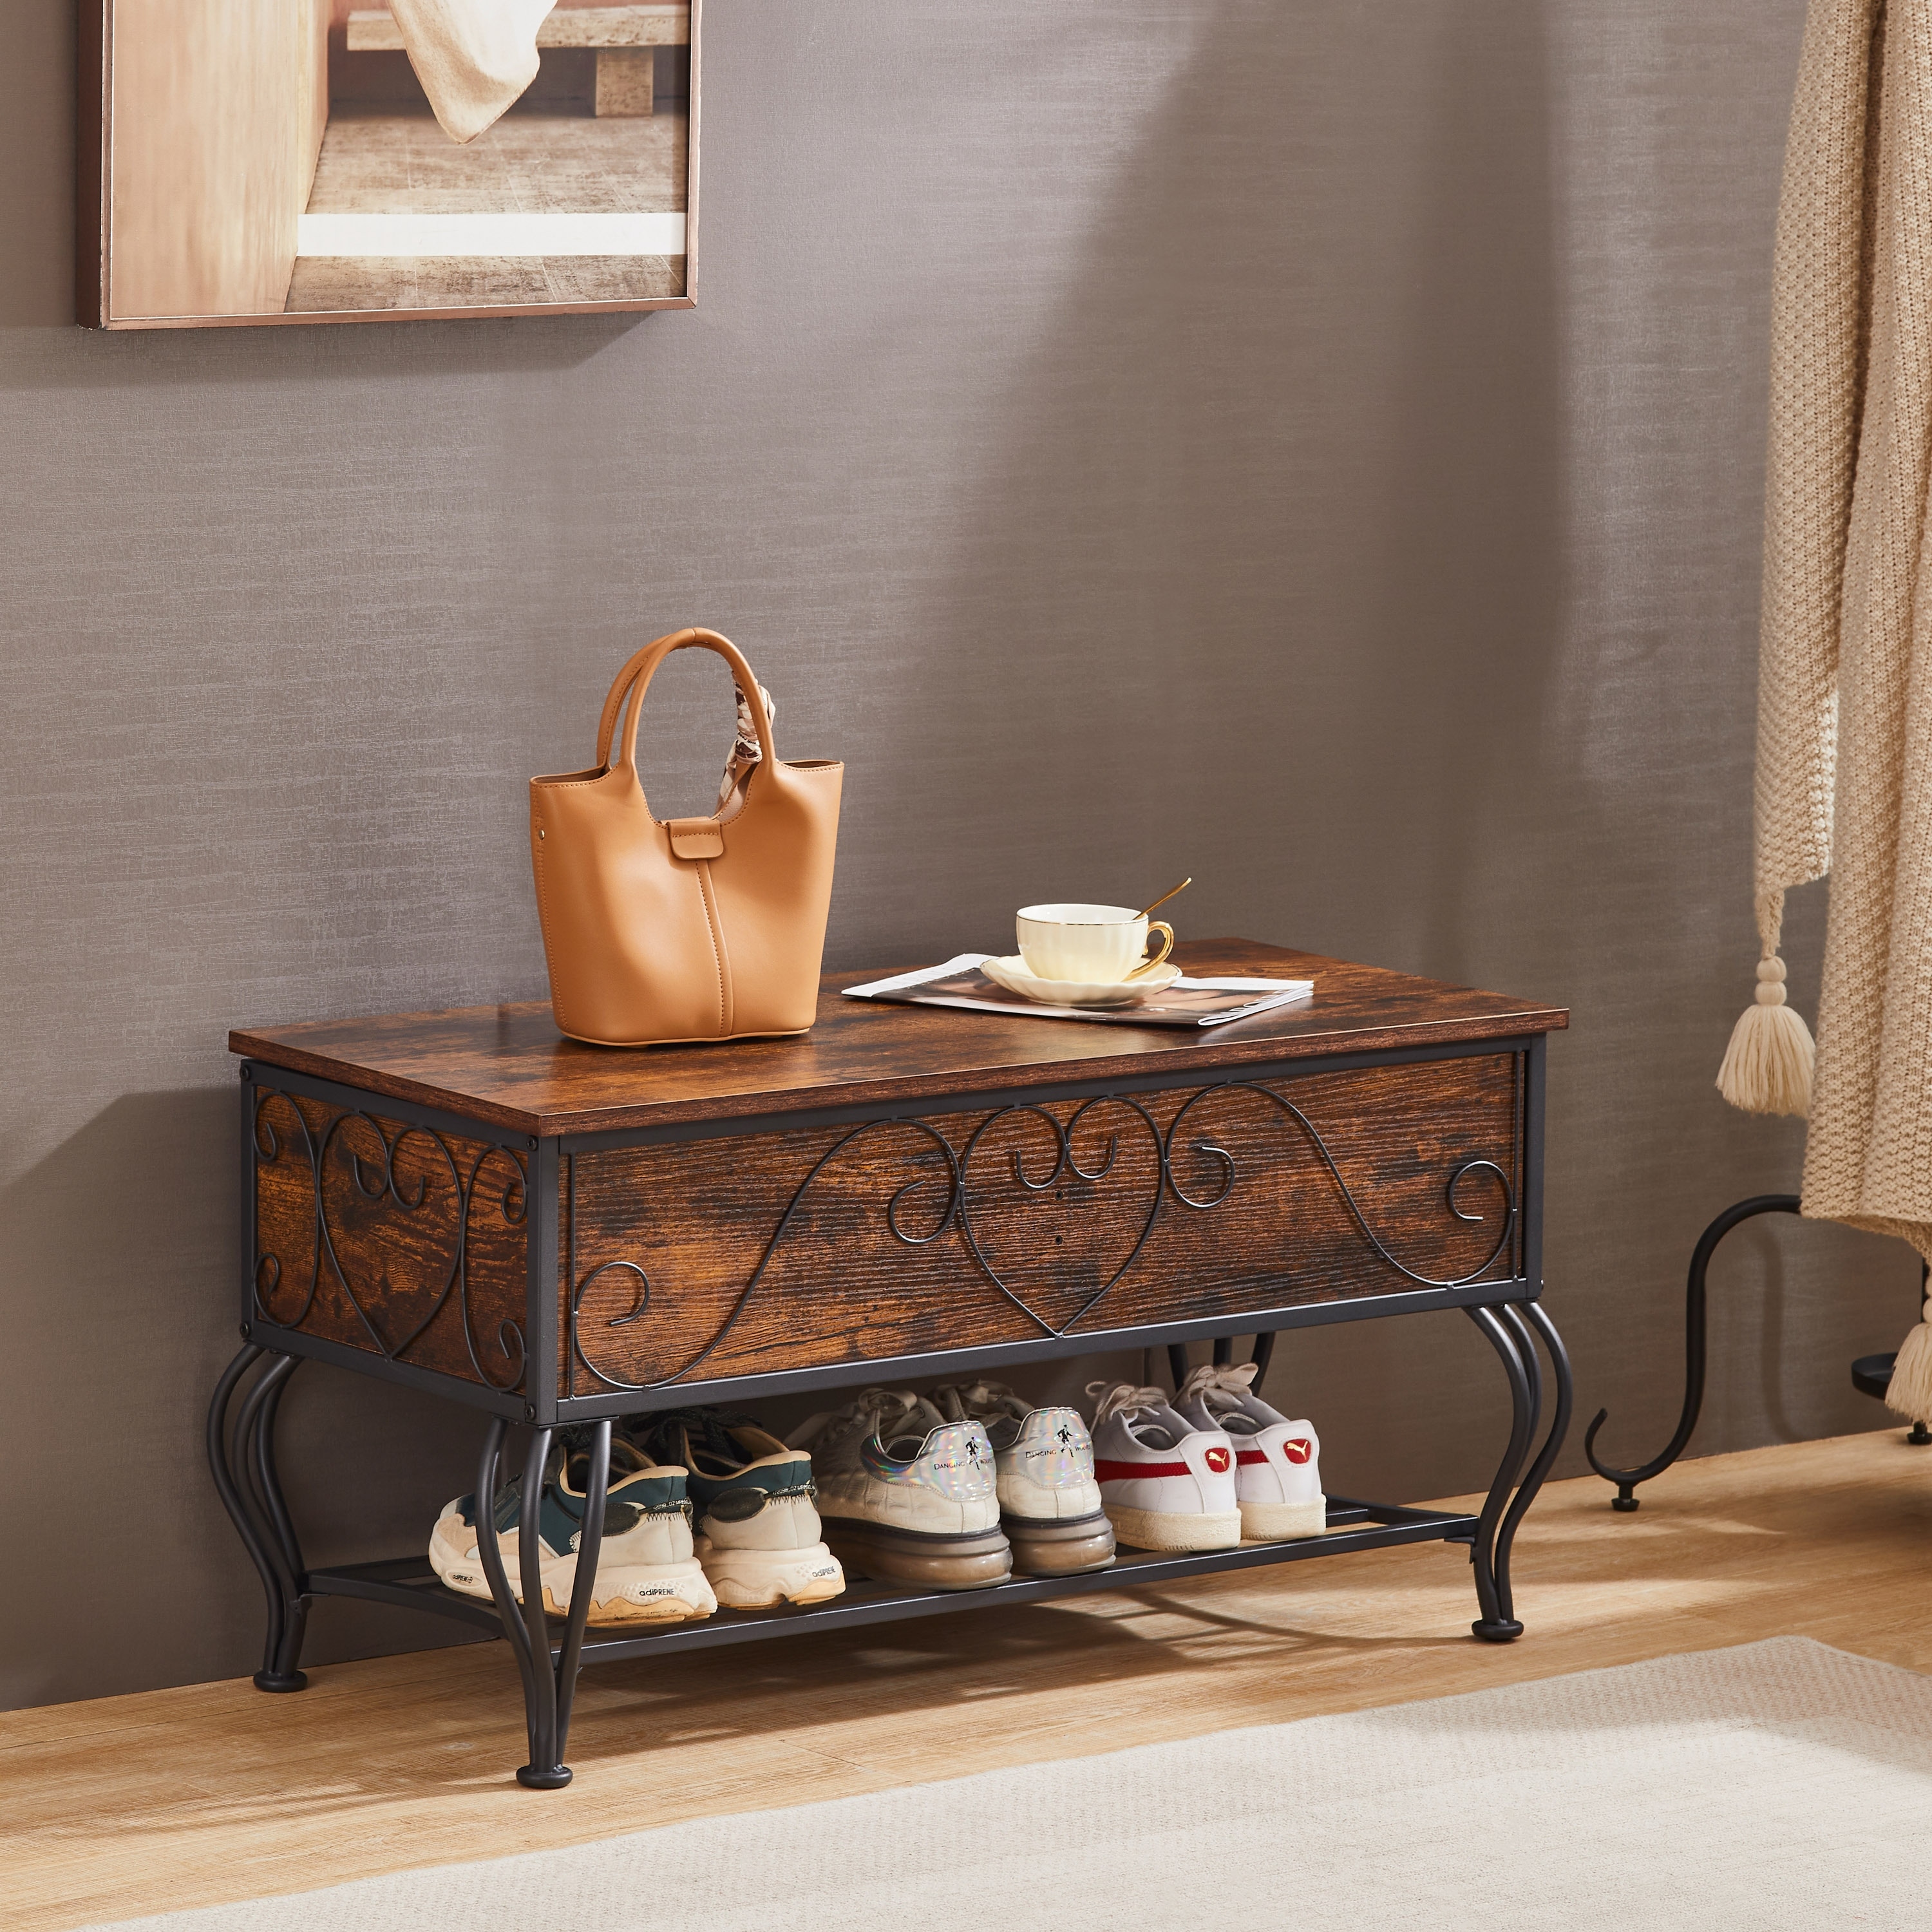 Shoe Rack Bench for Entryway, Industrial Bench with Shoe Storage Shelf,  Rustic Shoe Rack for Small Spaces - Bed Bath & Beyond - 39741657